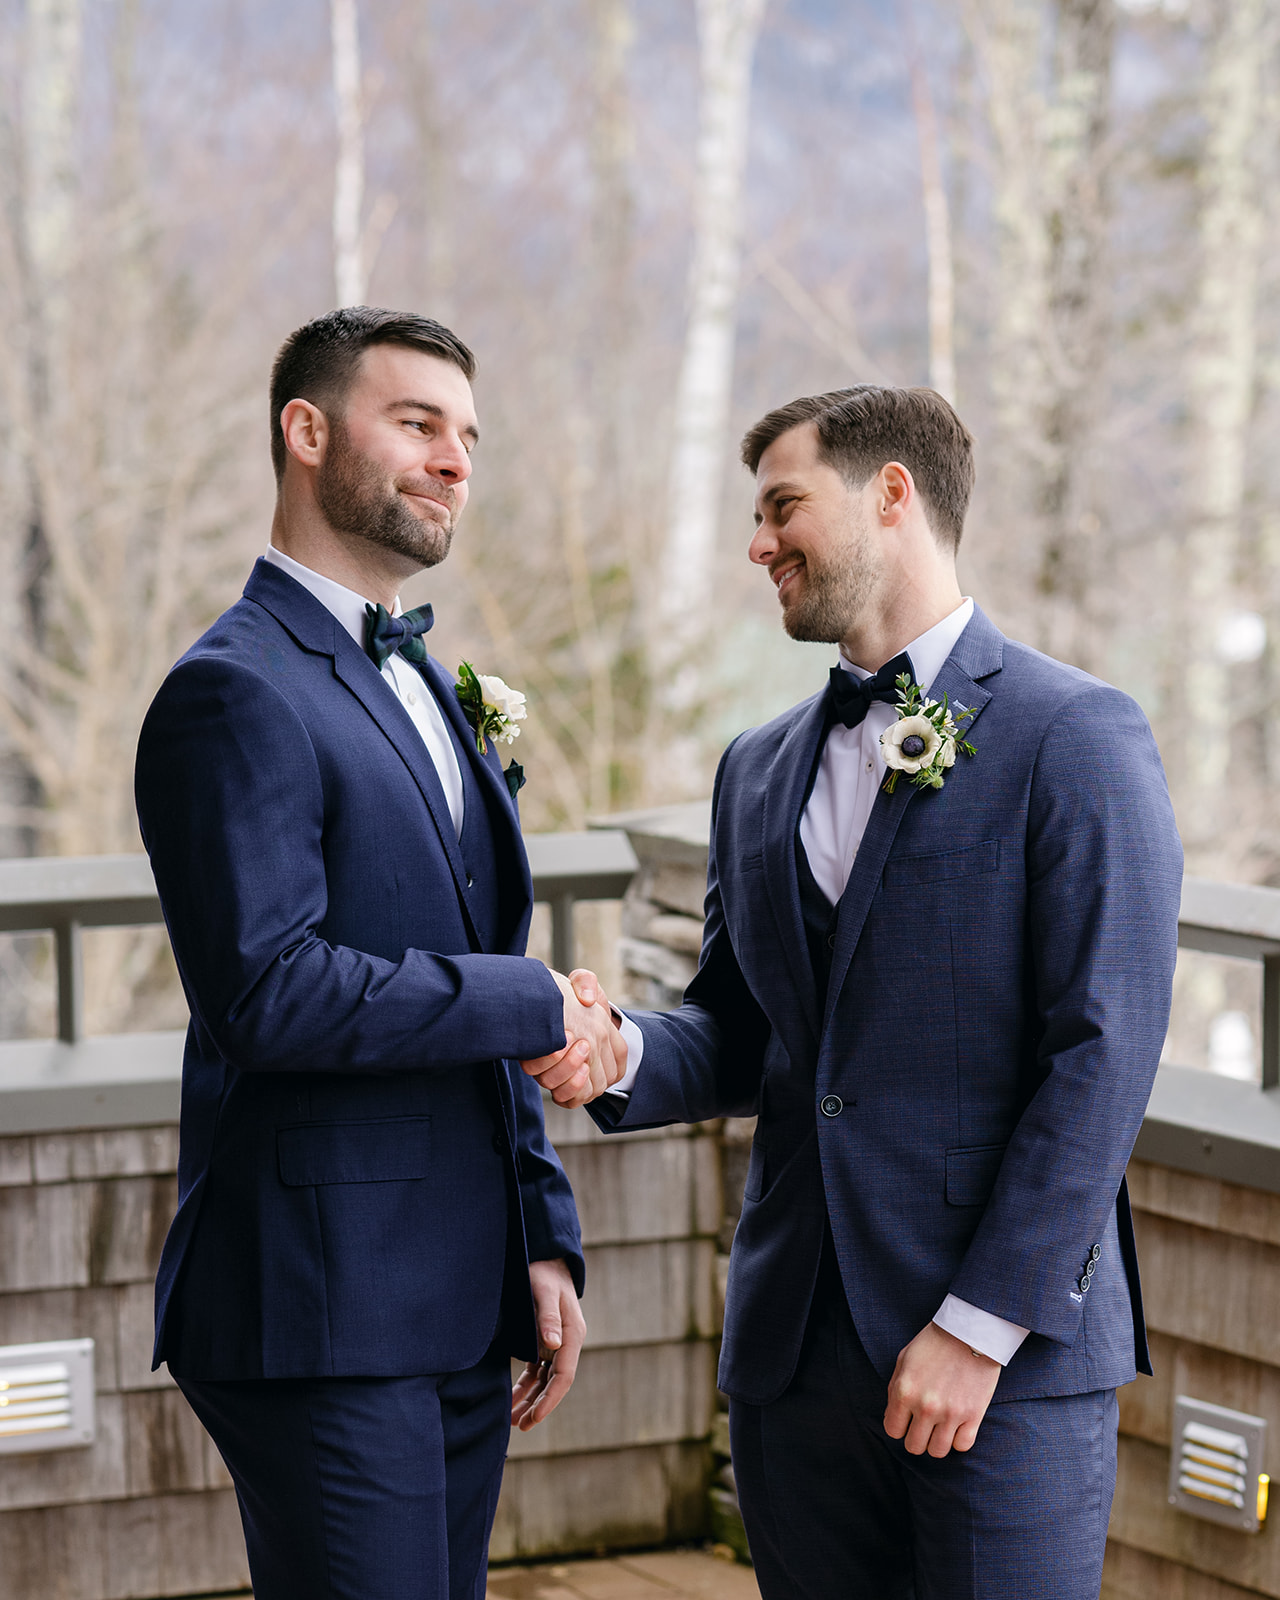 Tips for planning a winter wedding in Vermont